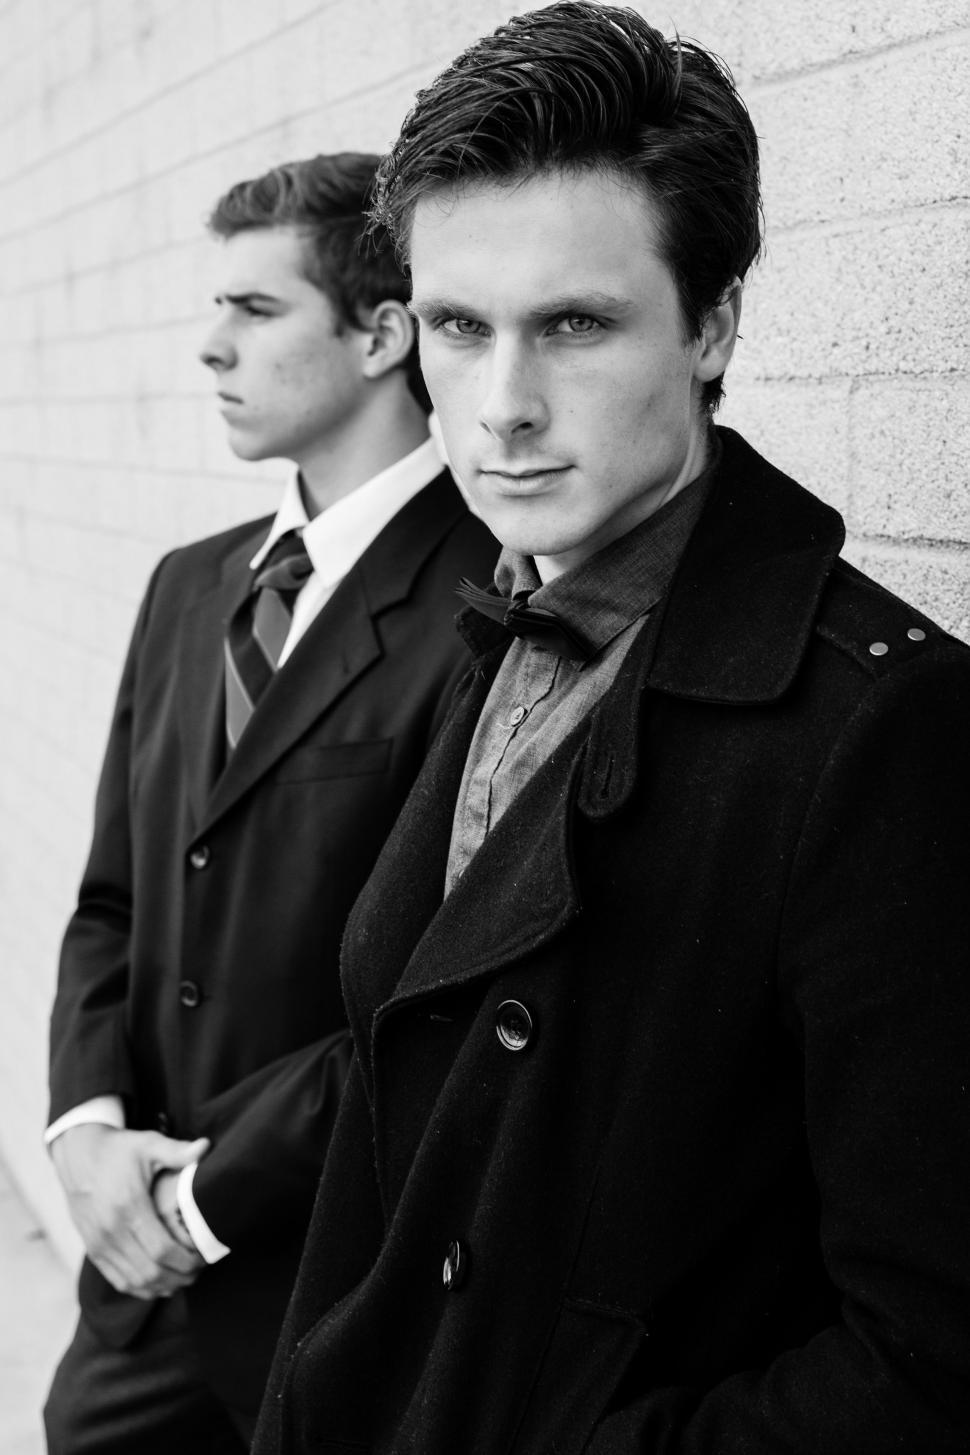 Free Image of Two Men in Suits 